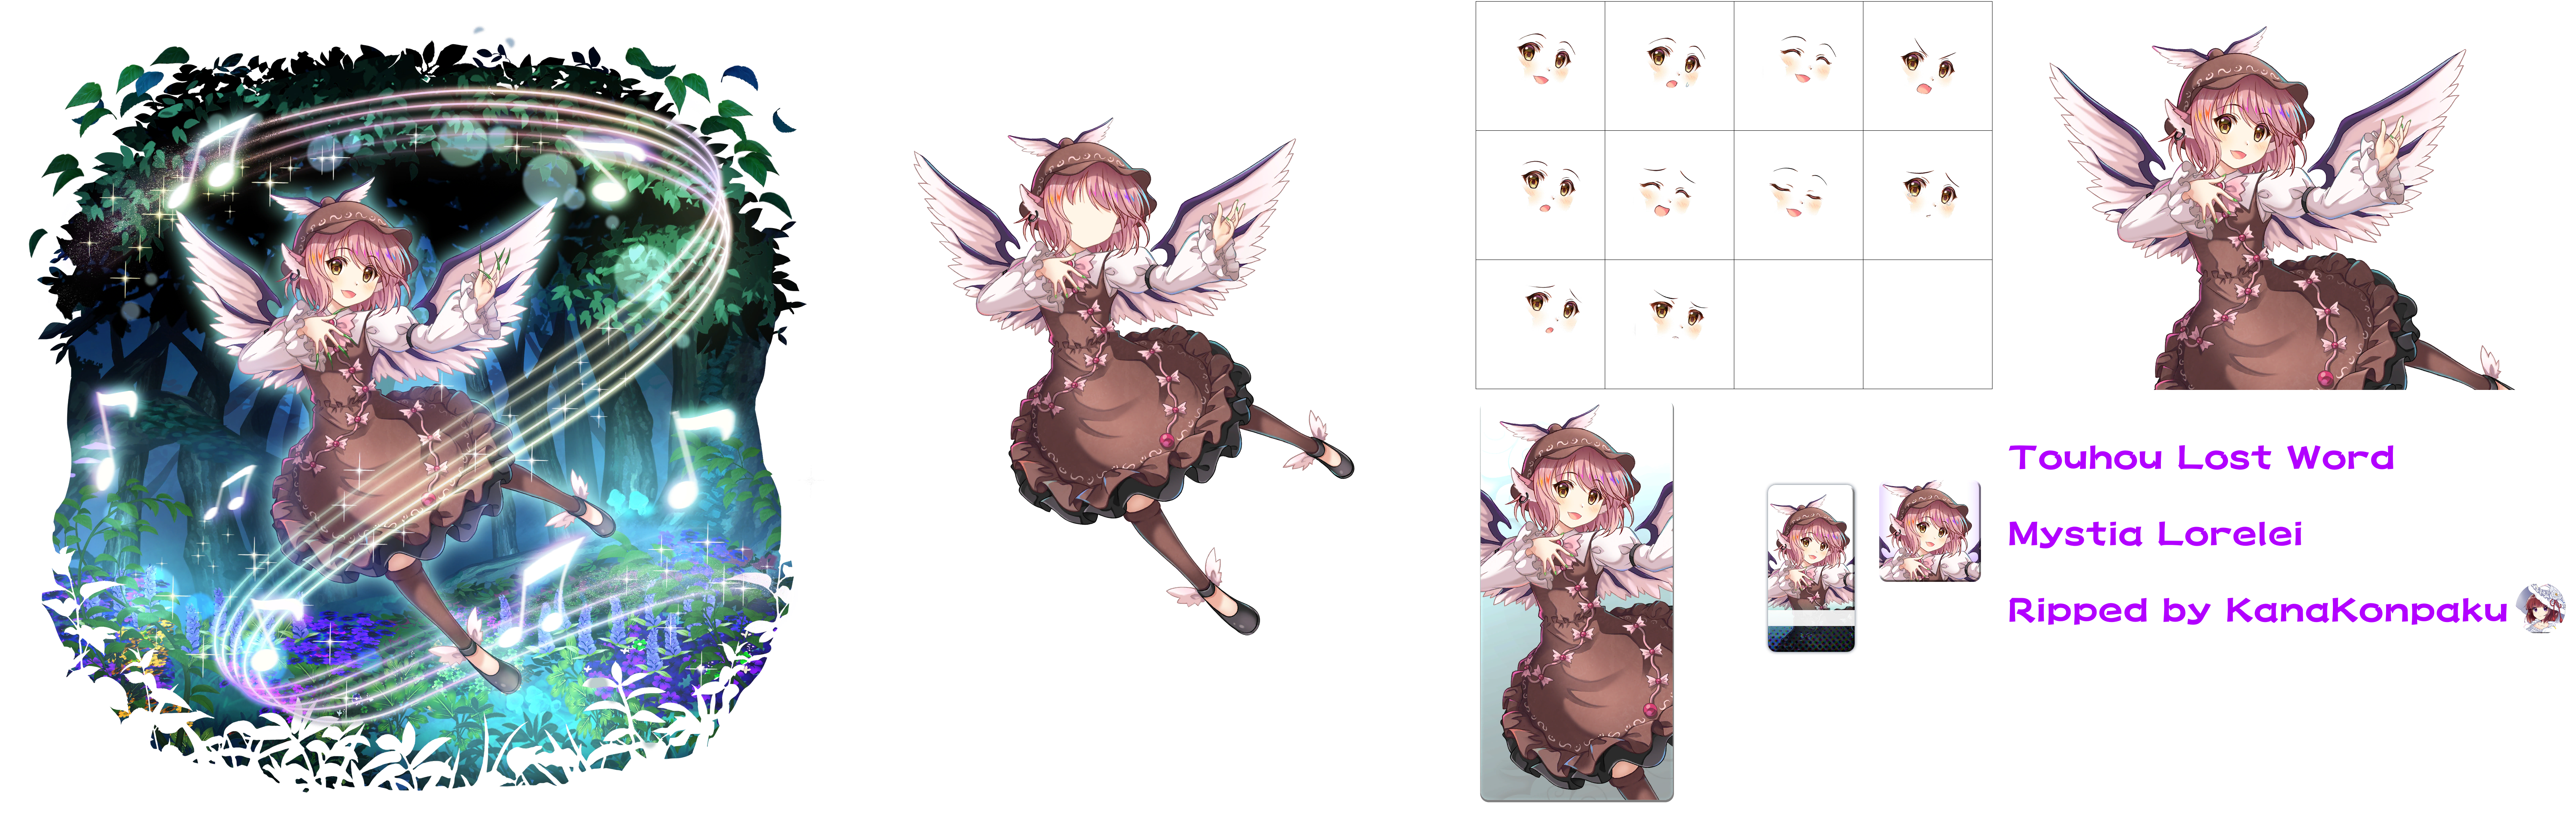 Mystia Lorelei - Touhou Wiki - Characters, games, locations, and more